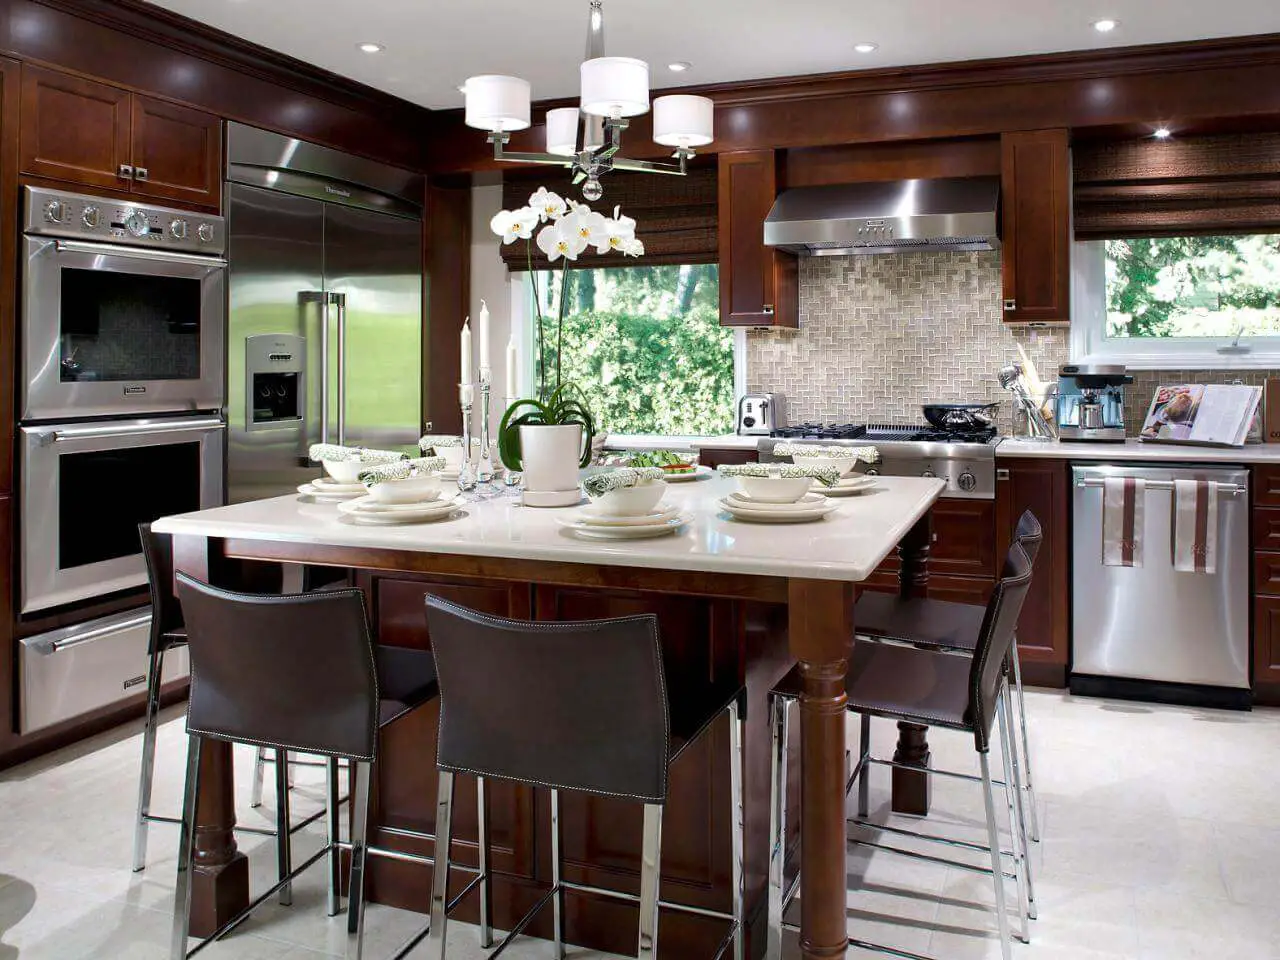 Kitchen Island with Seating for Six